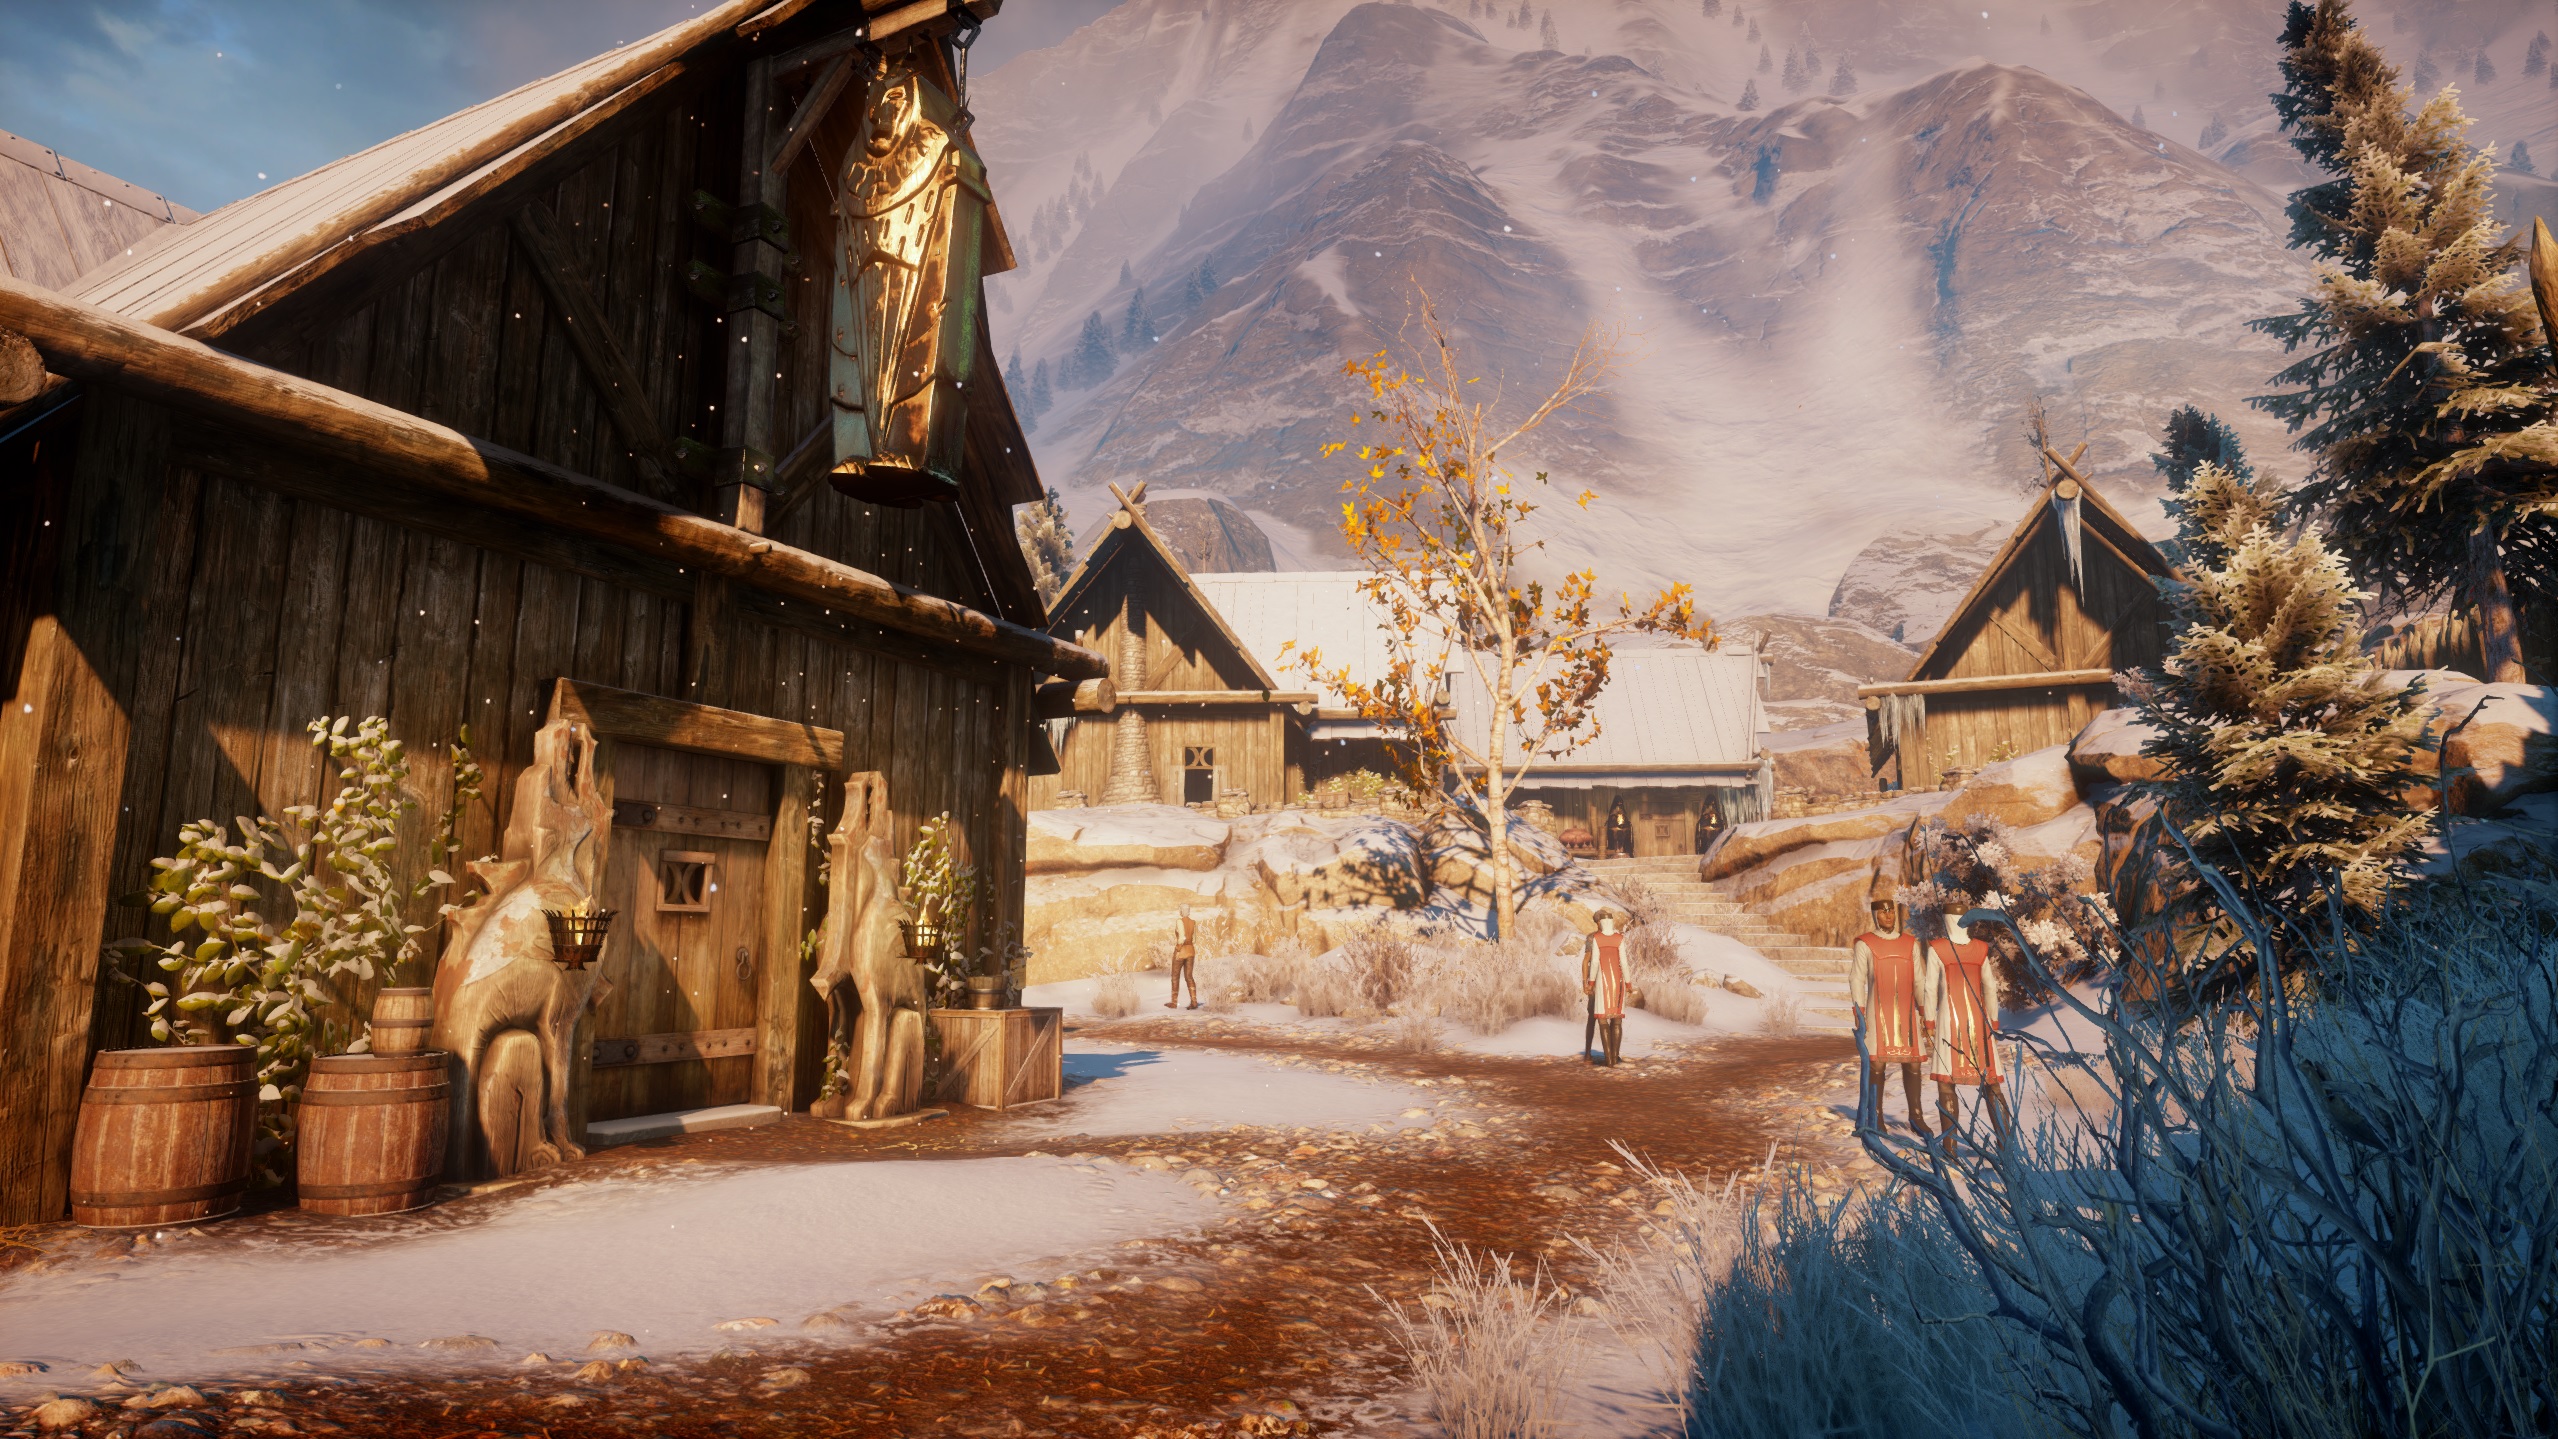 Dragon Age: Inquisition - The snowy outdoor paths and buildings in Haven.